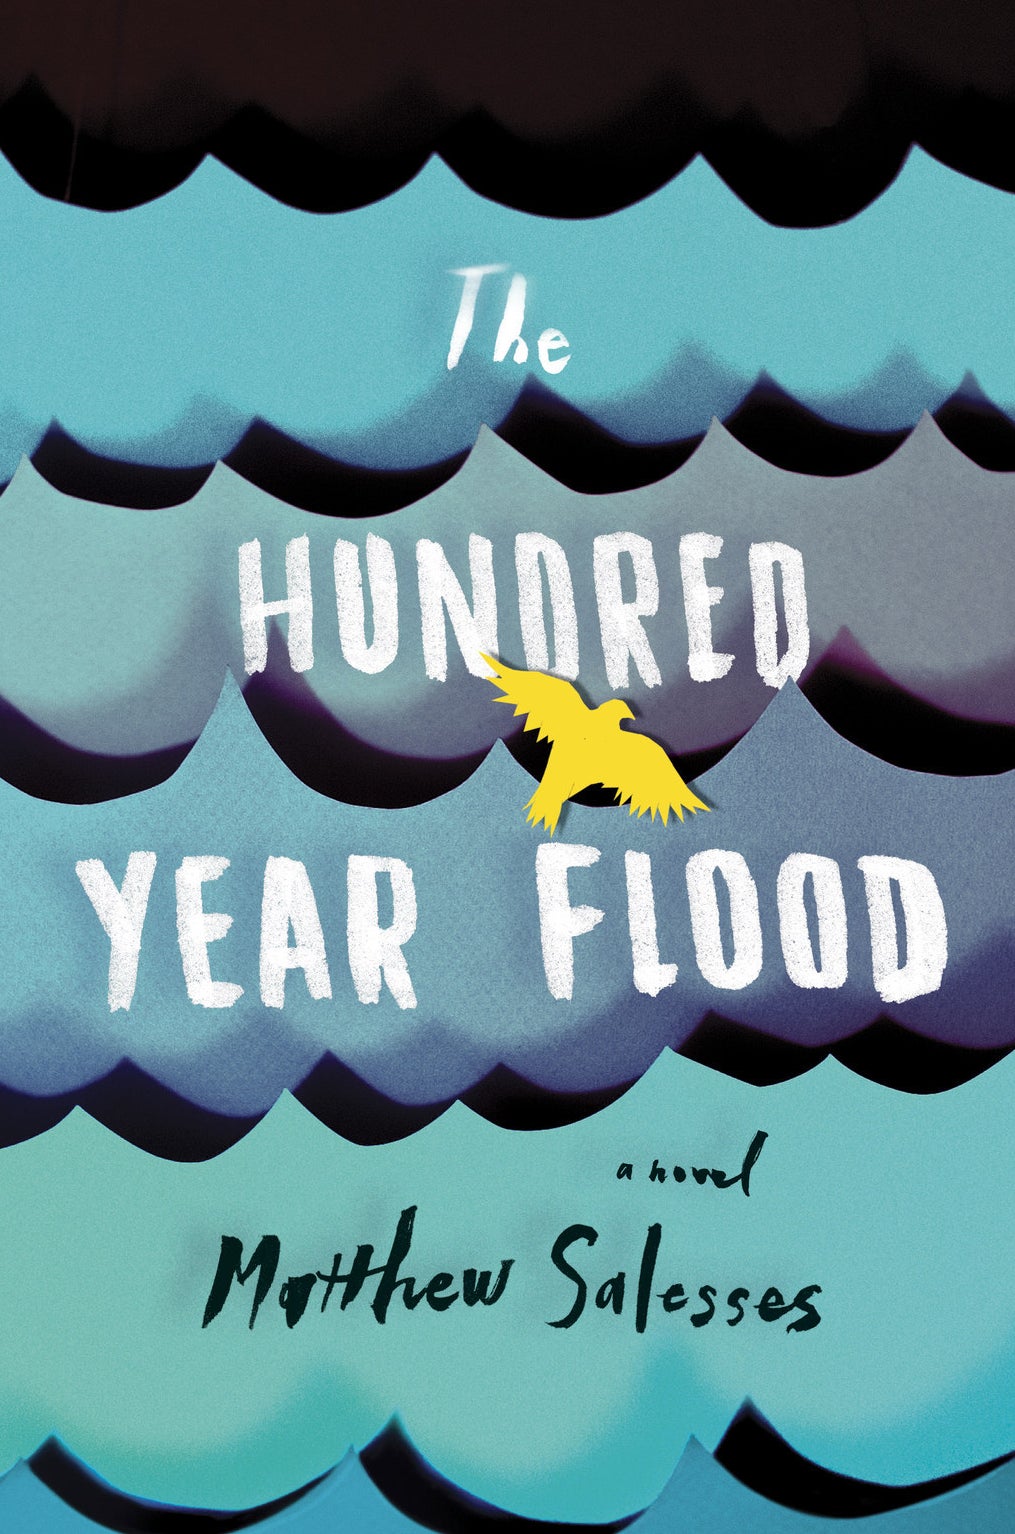 The Hundred Year Flood by Matthew Salesses